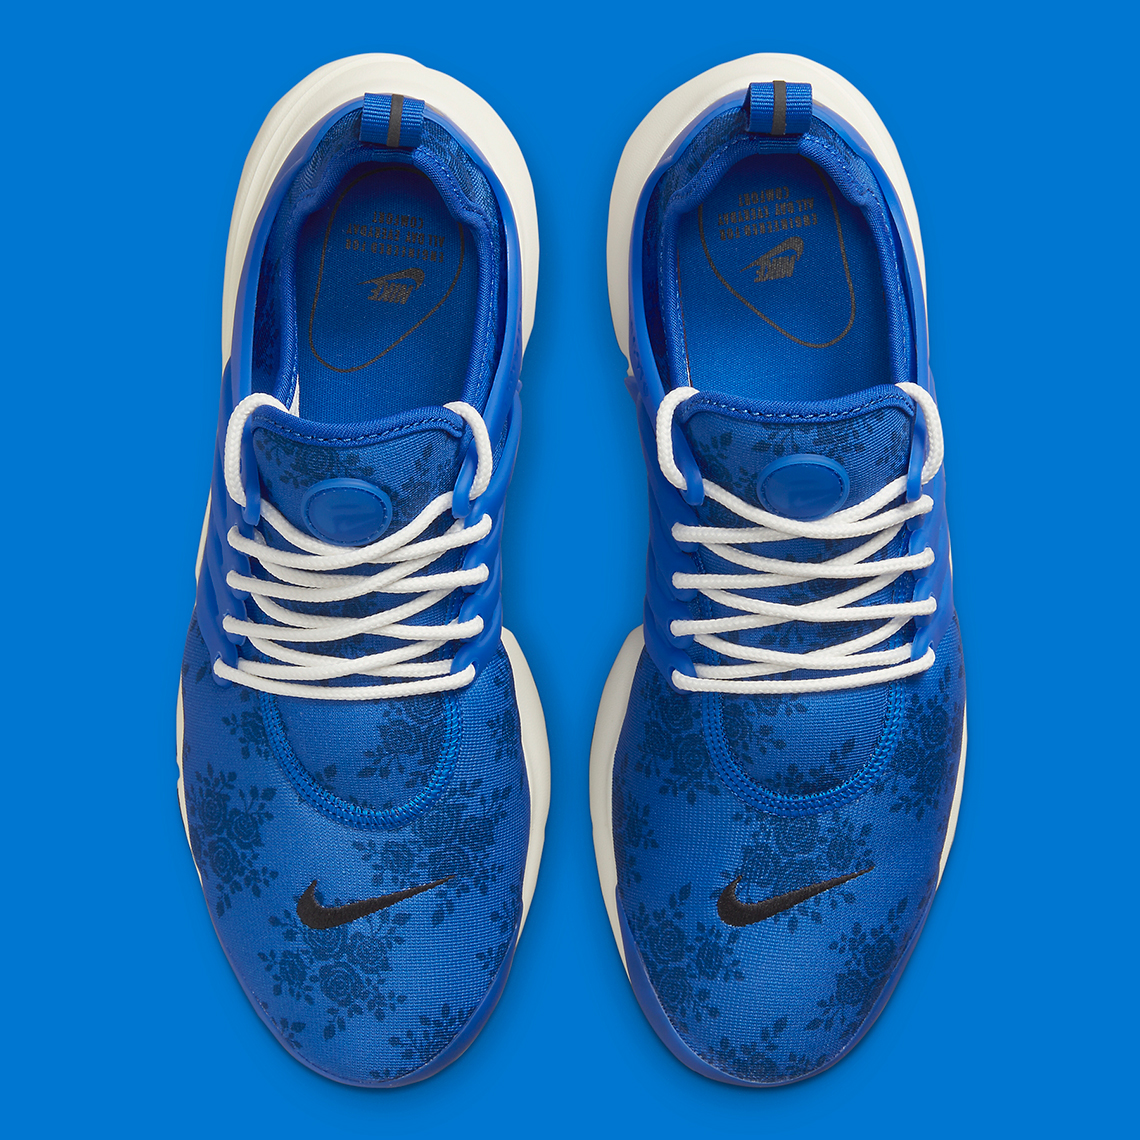 Nike Air Force 1 High "Dodgers" Dx3376 400 2